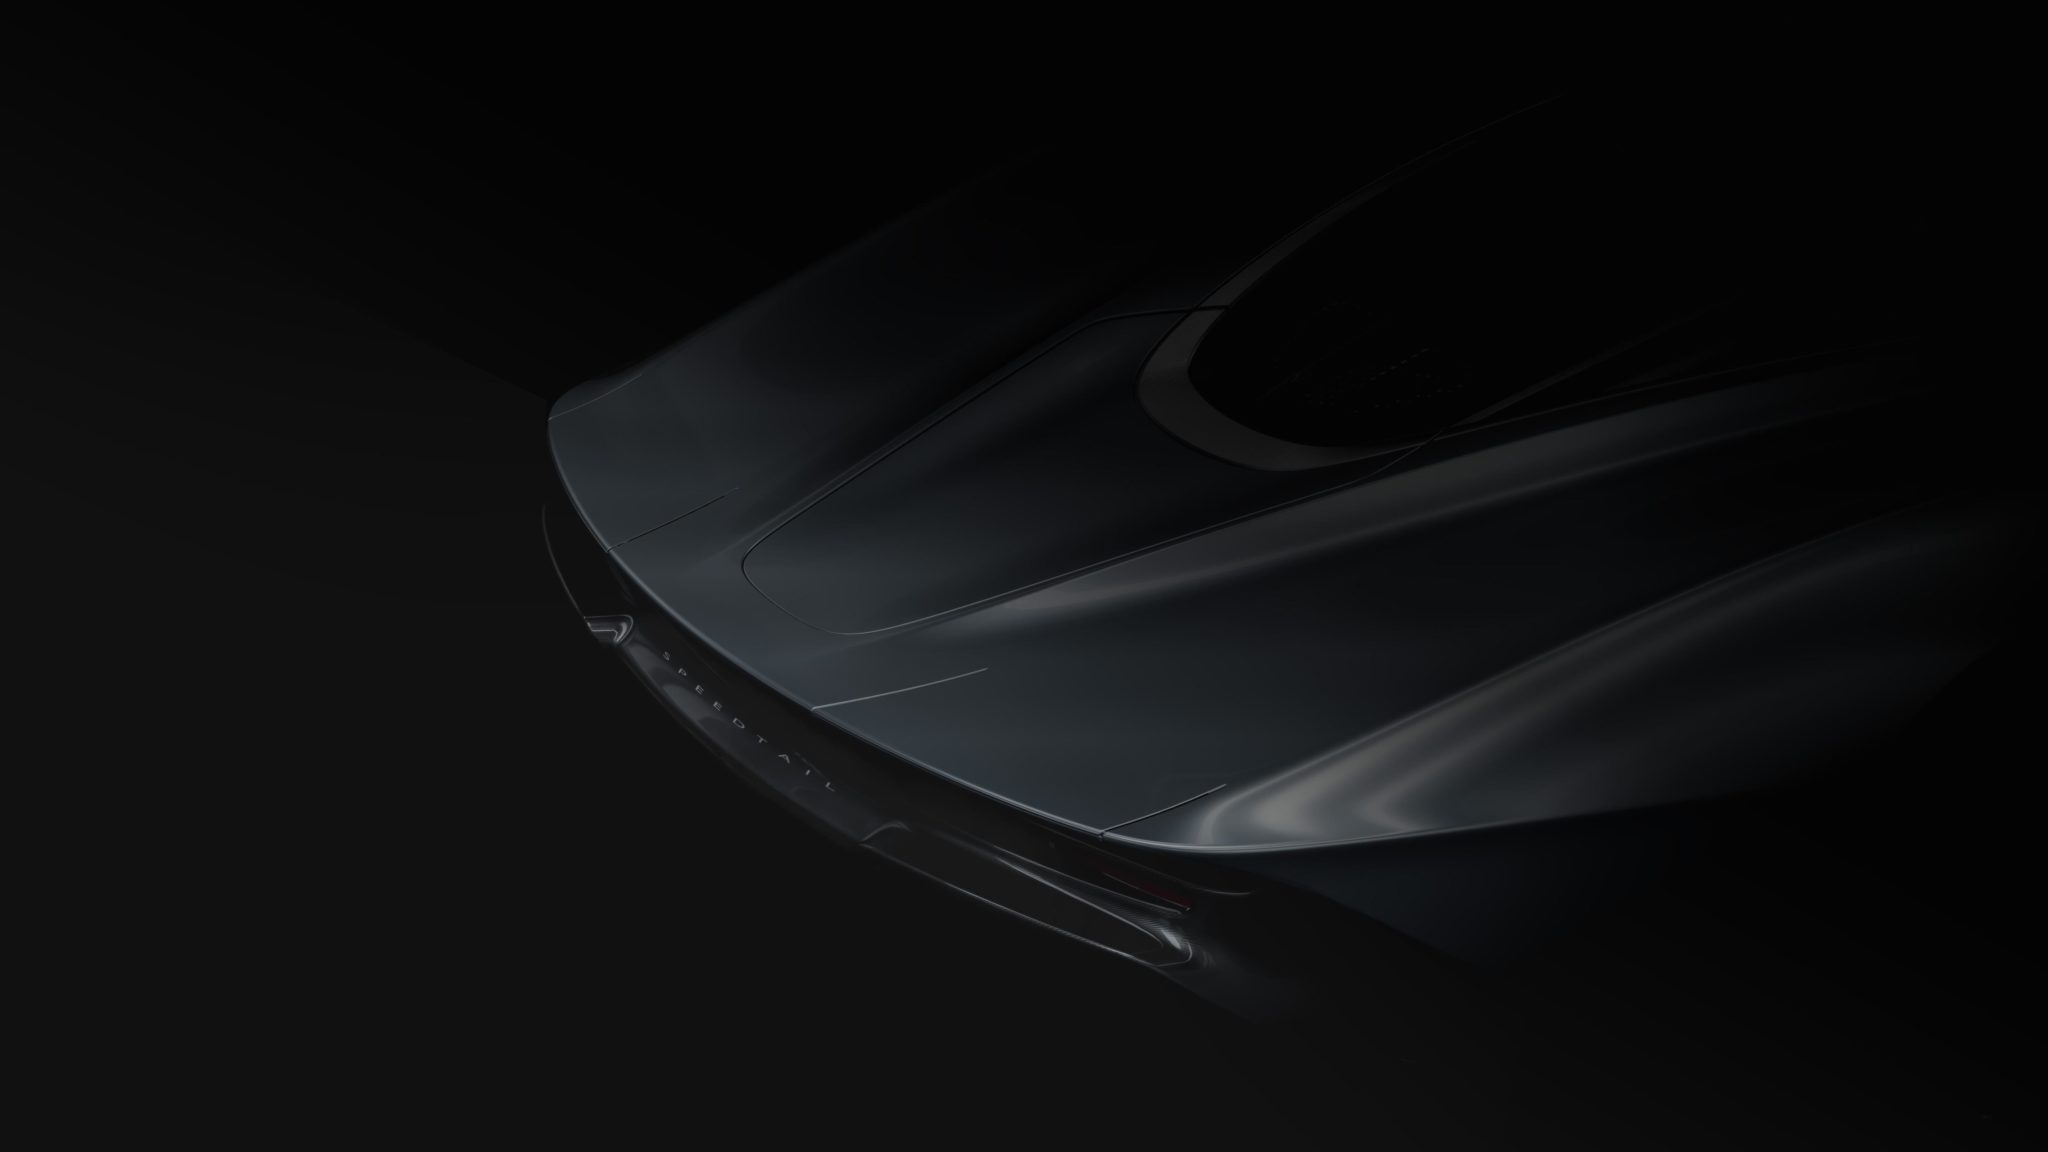 McLaren F1 Gets 2021 Redesign, Looks Like a Faster Speedtail - autoevolution